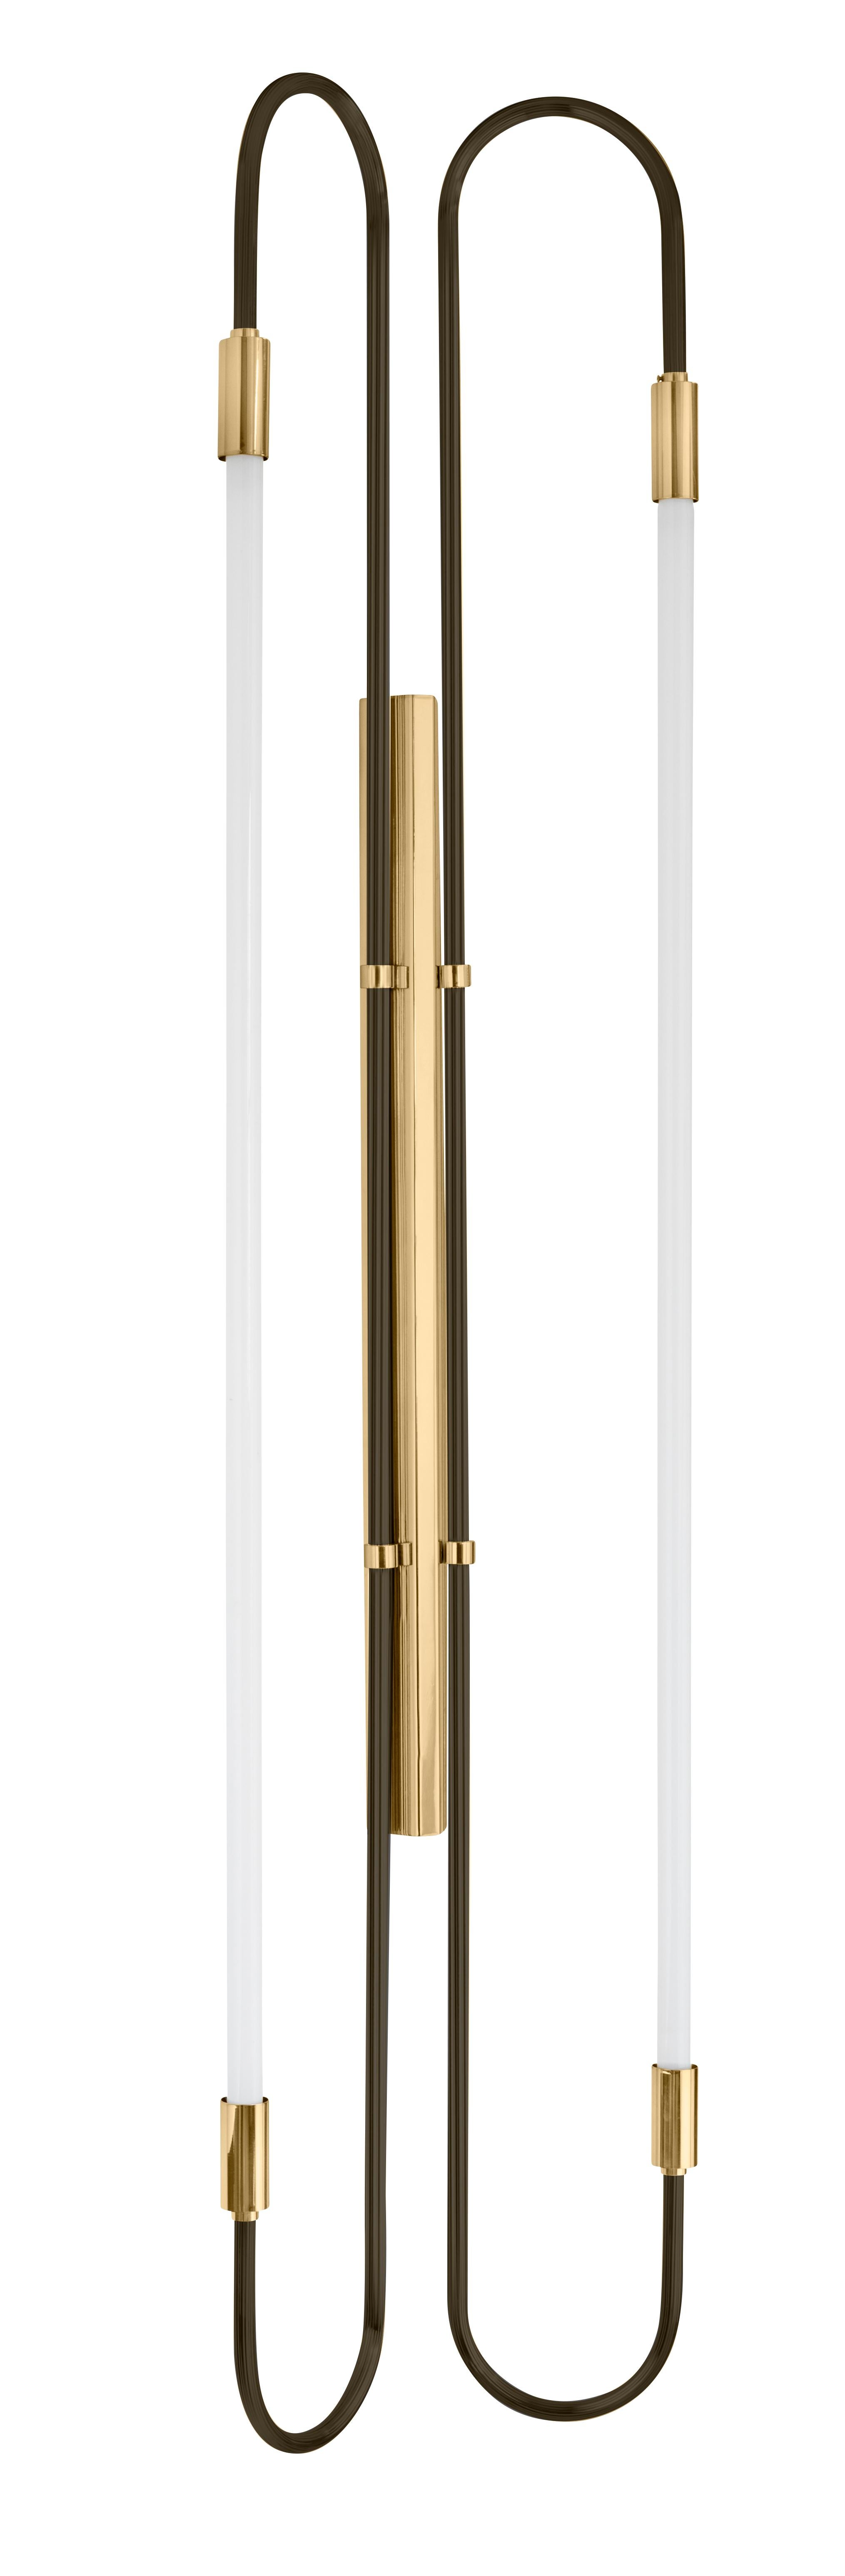 Pair of back and brass wall lamps neon double 170 by Magic Circus Editions
Dimensions: H. 170 cm, W. 37 cm, D. 11 cm, 3.6 kg.
Materials: fluted brass tube and glass.
Available finishes: brass (lacquered polished brass, unlacquered polished brass,